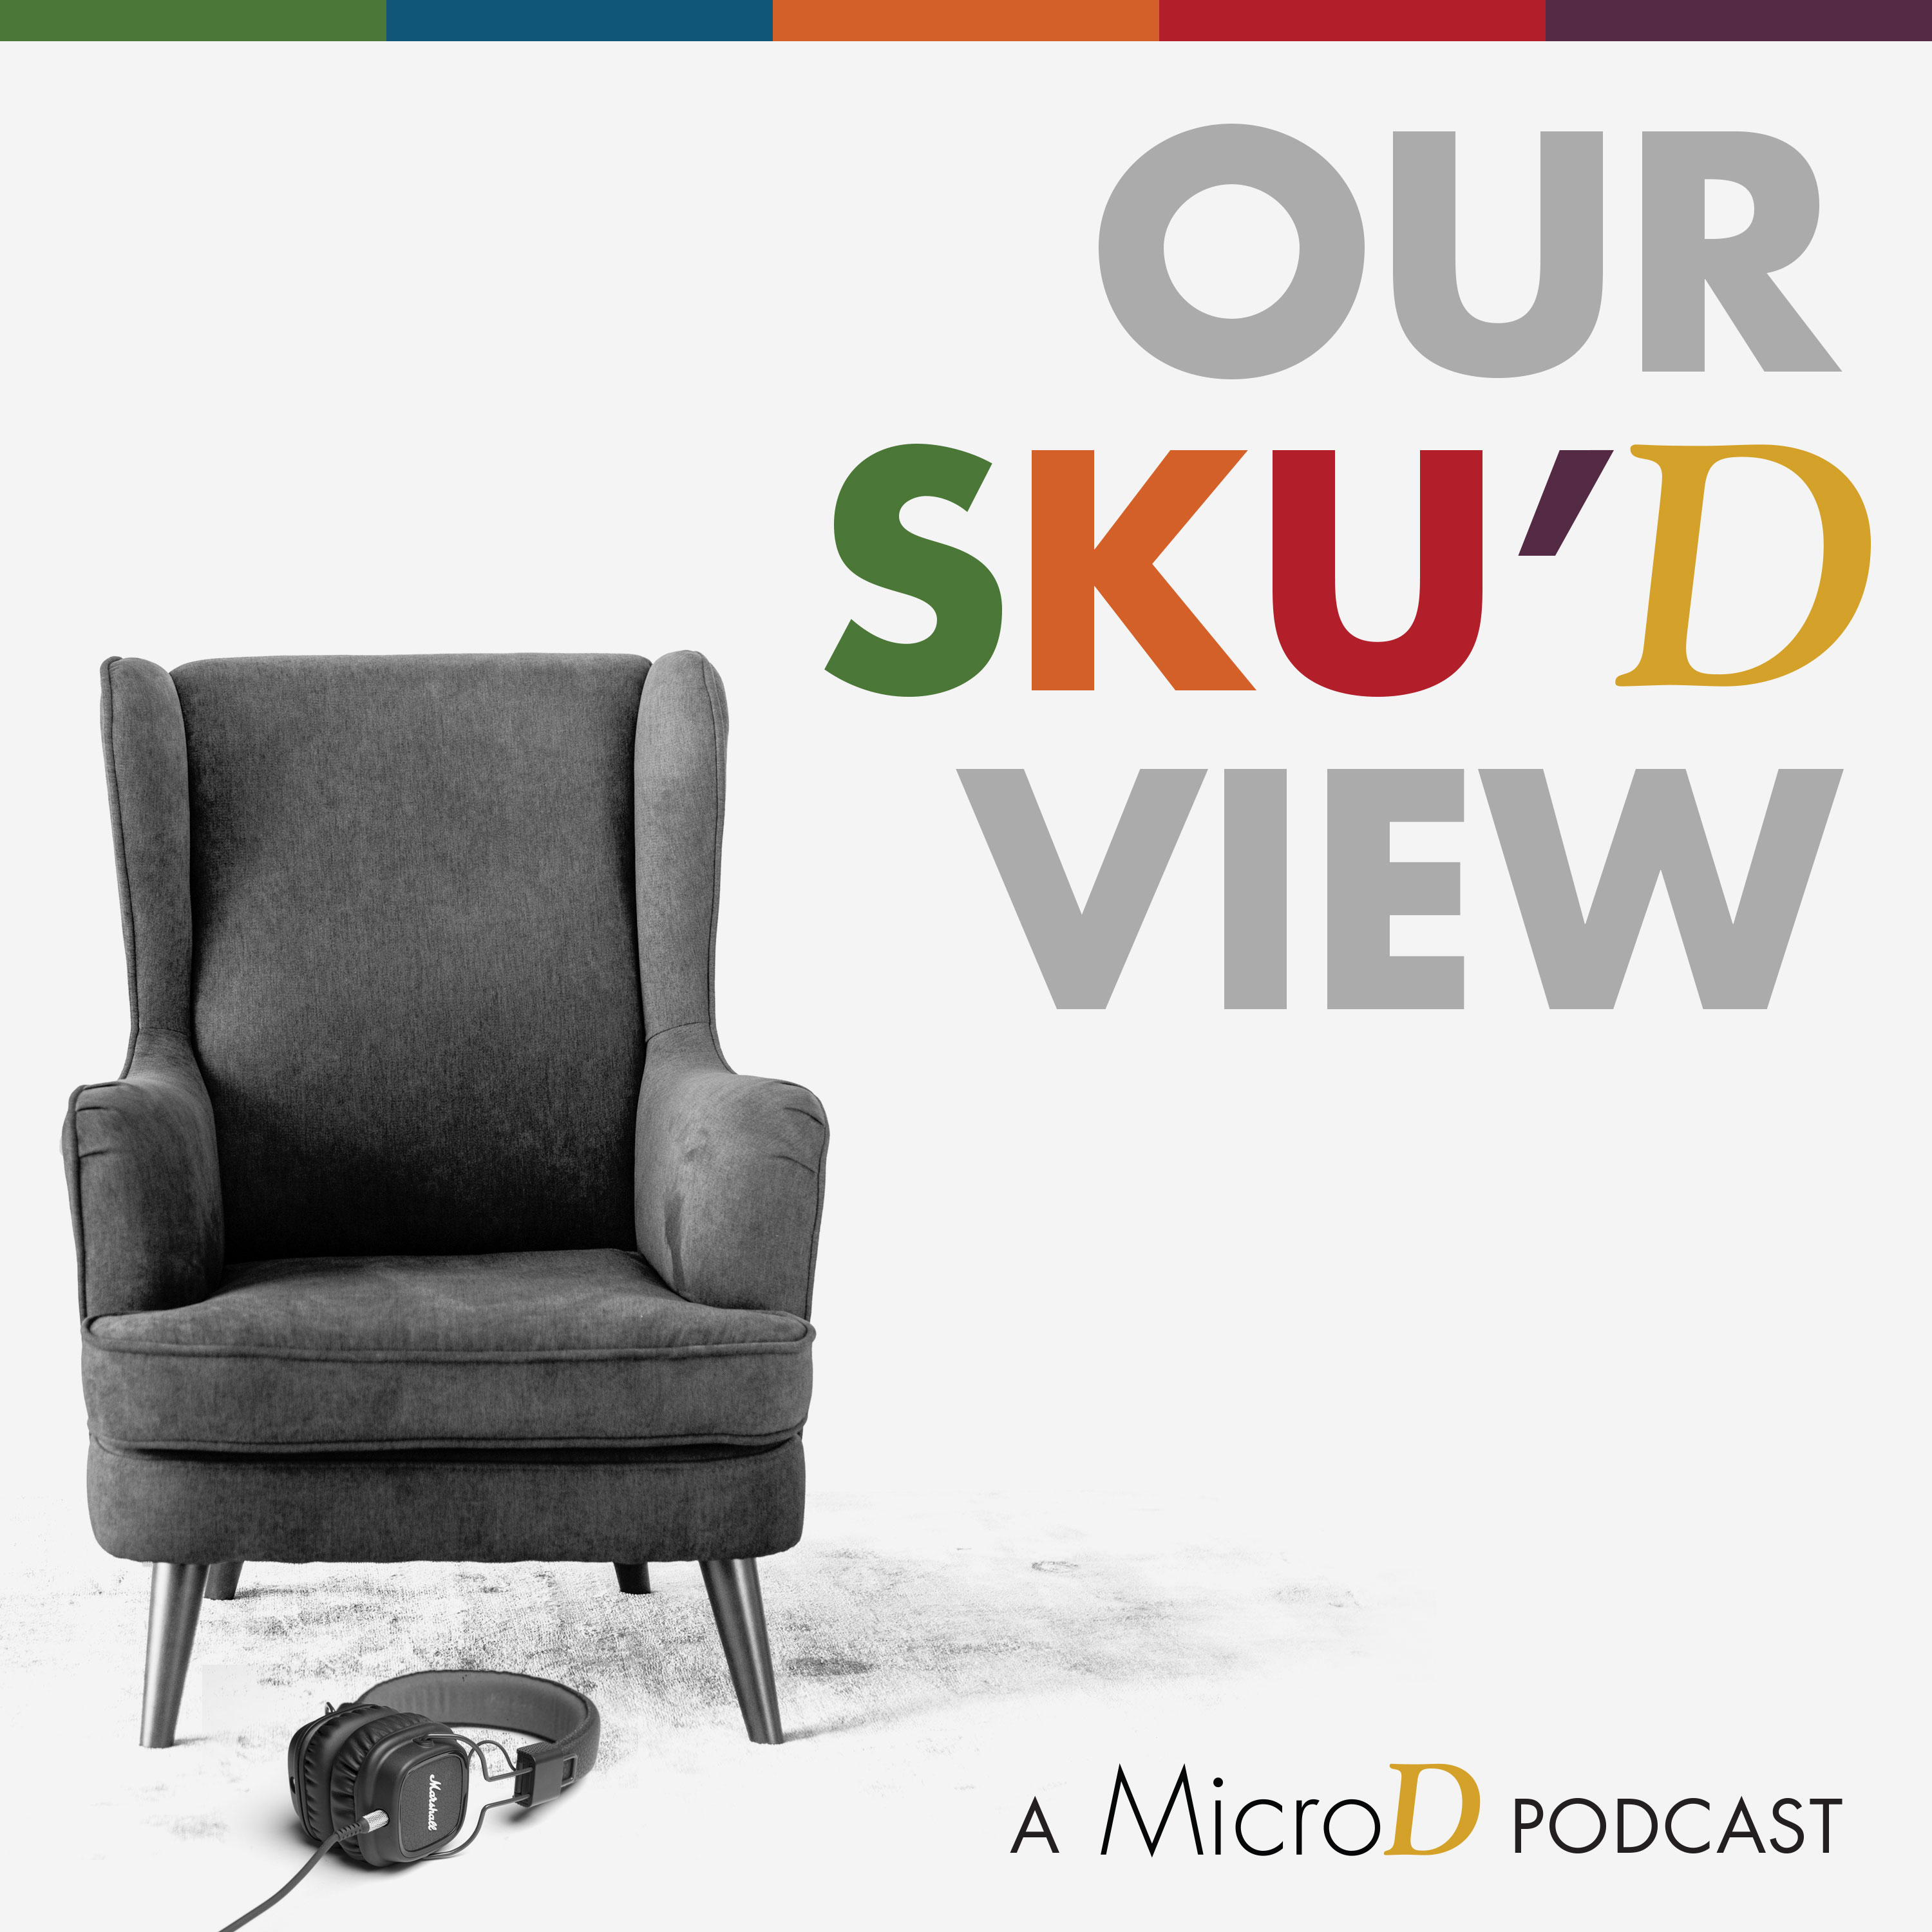 Our SKU'D View